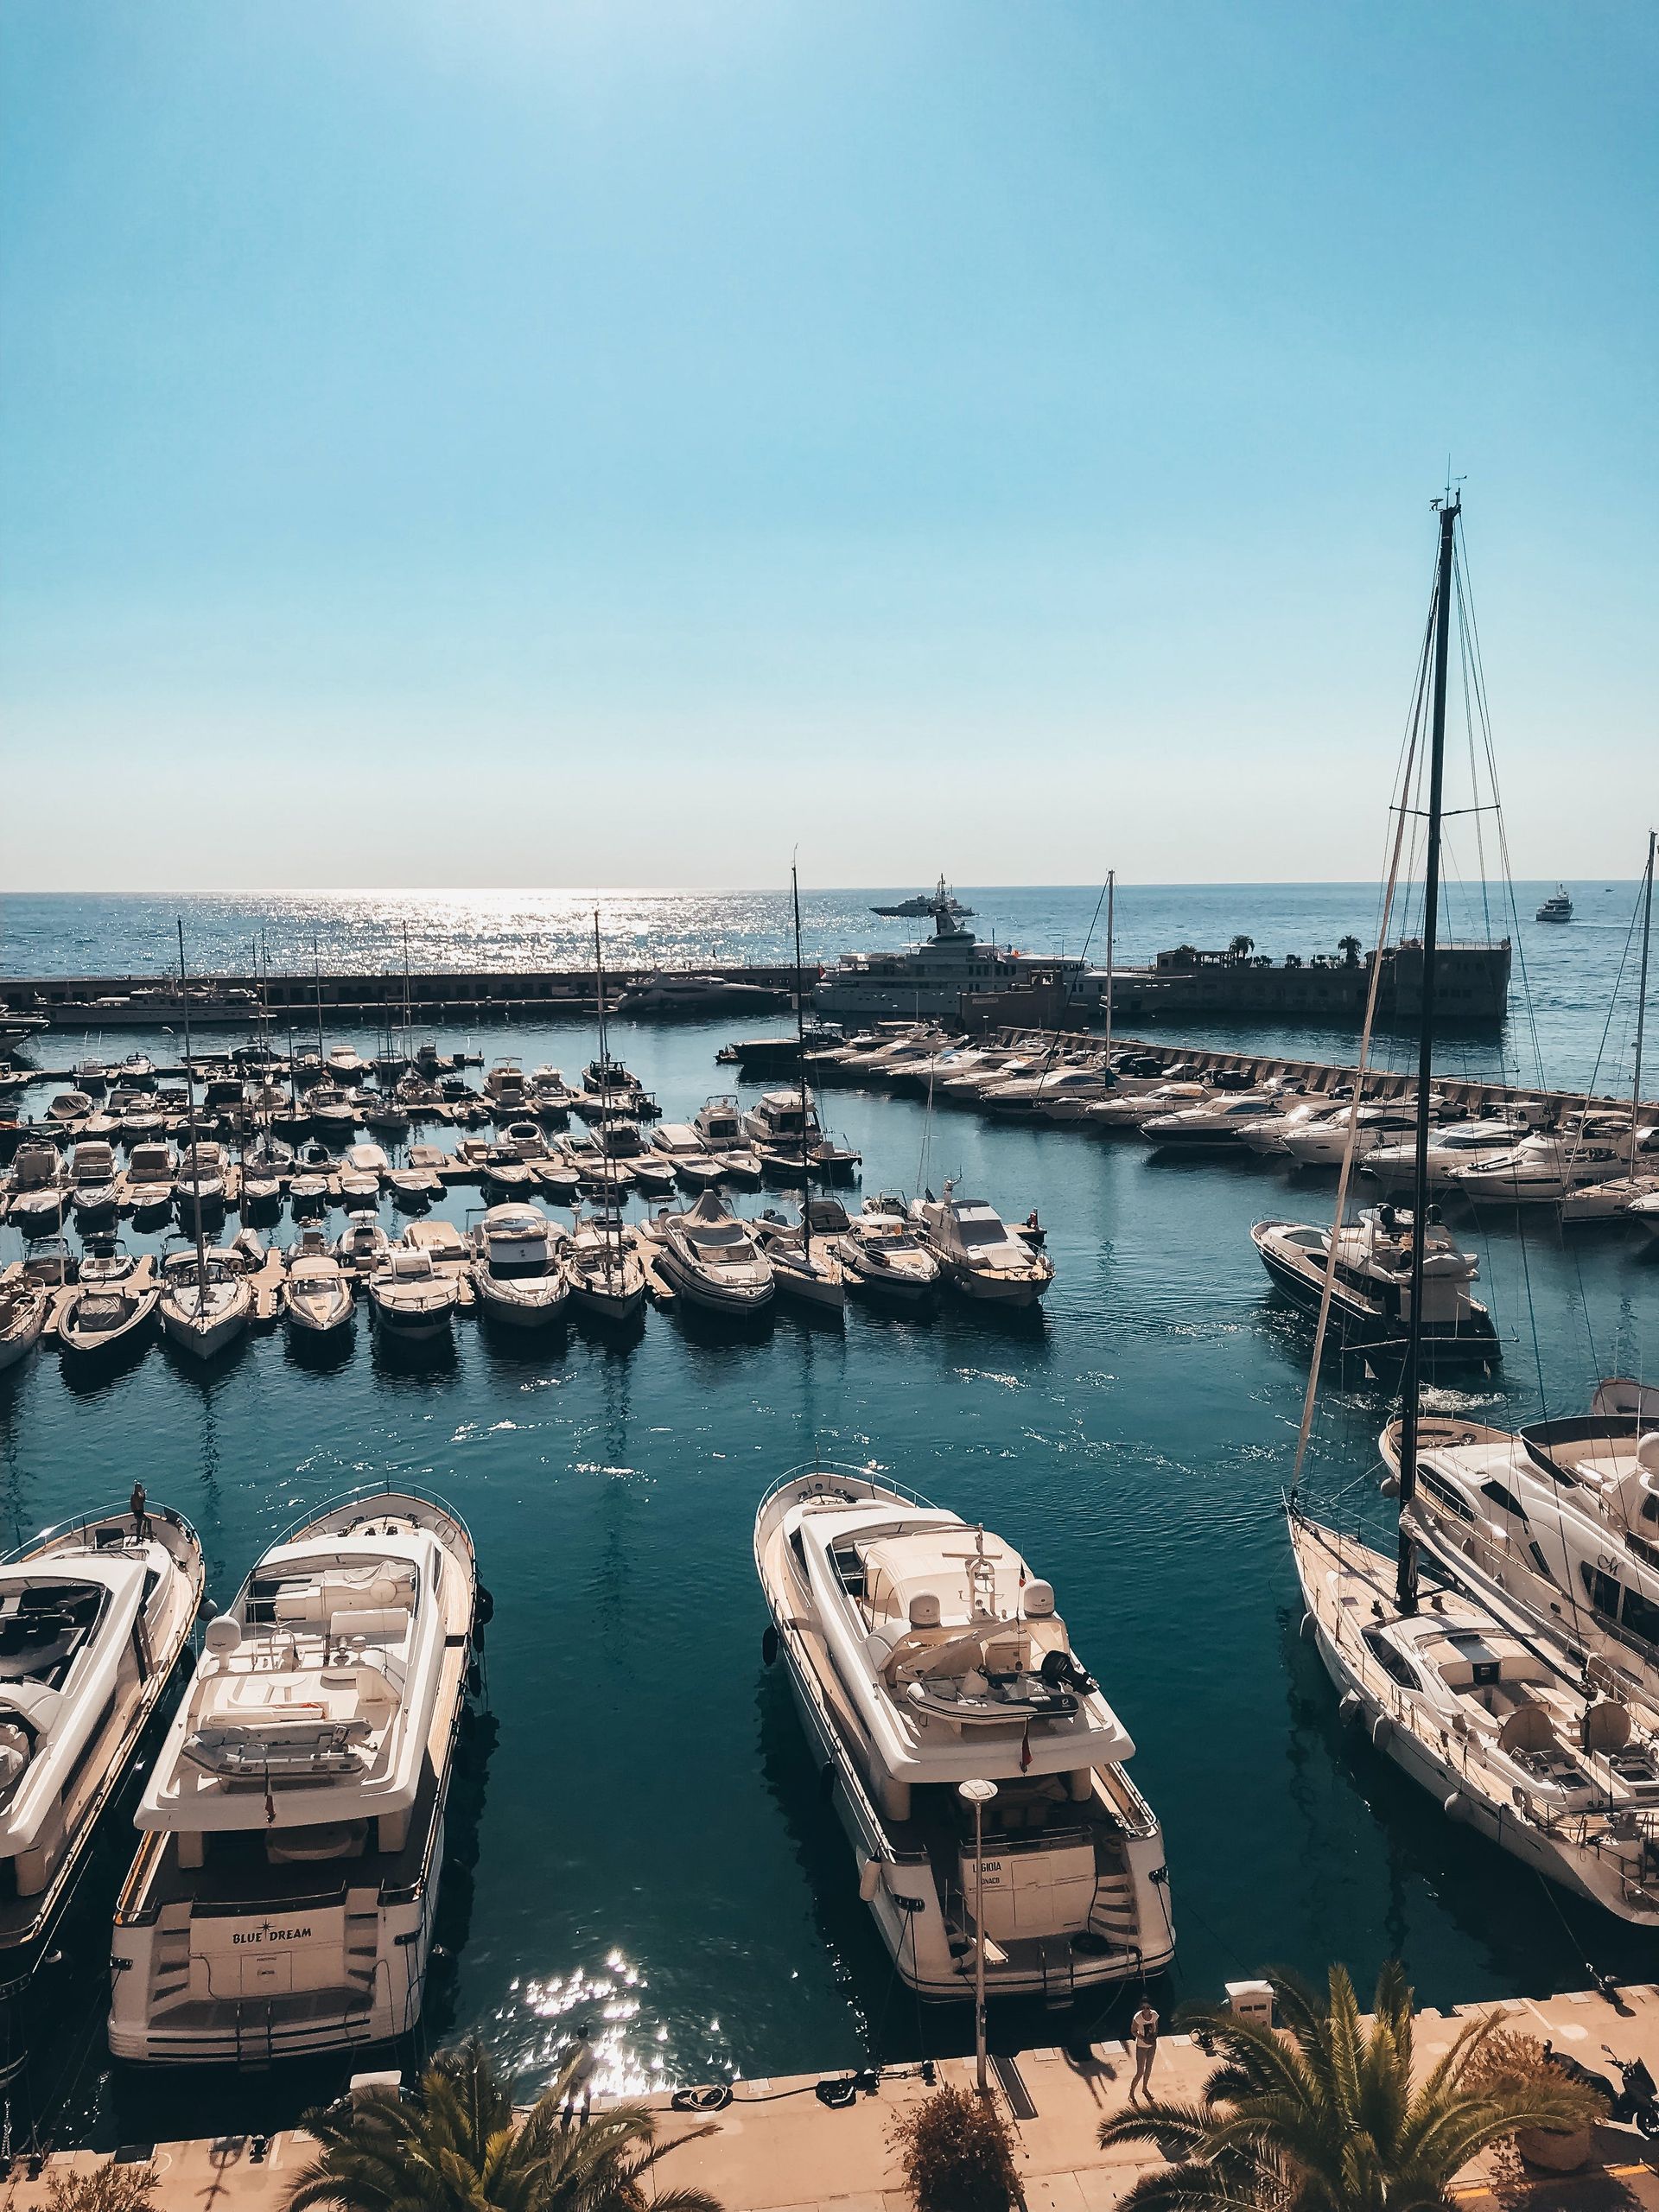 marina full of boats by vincent gerbouin